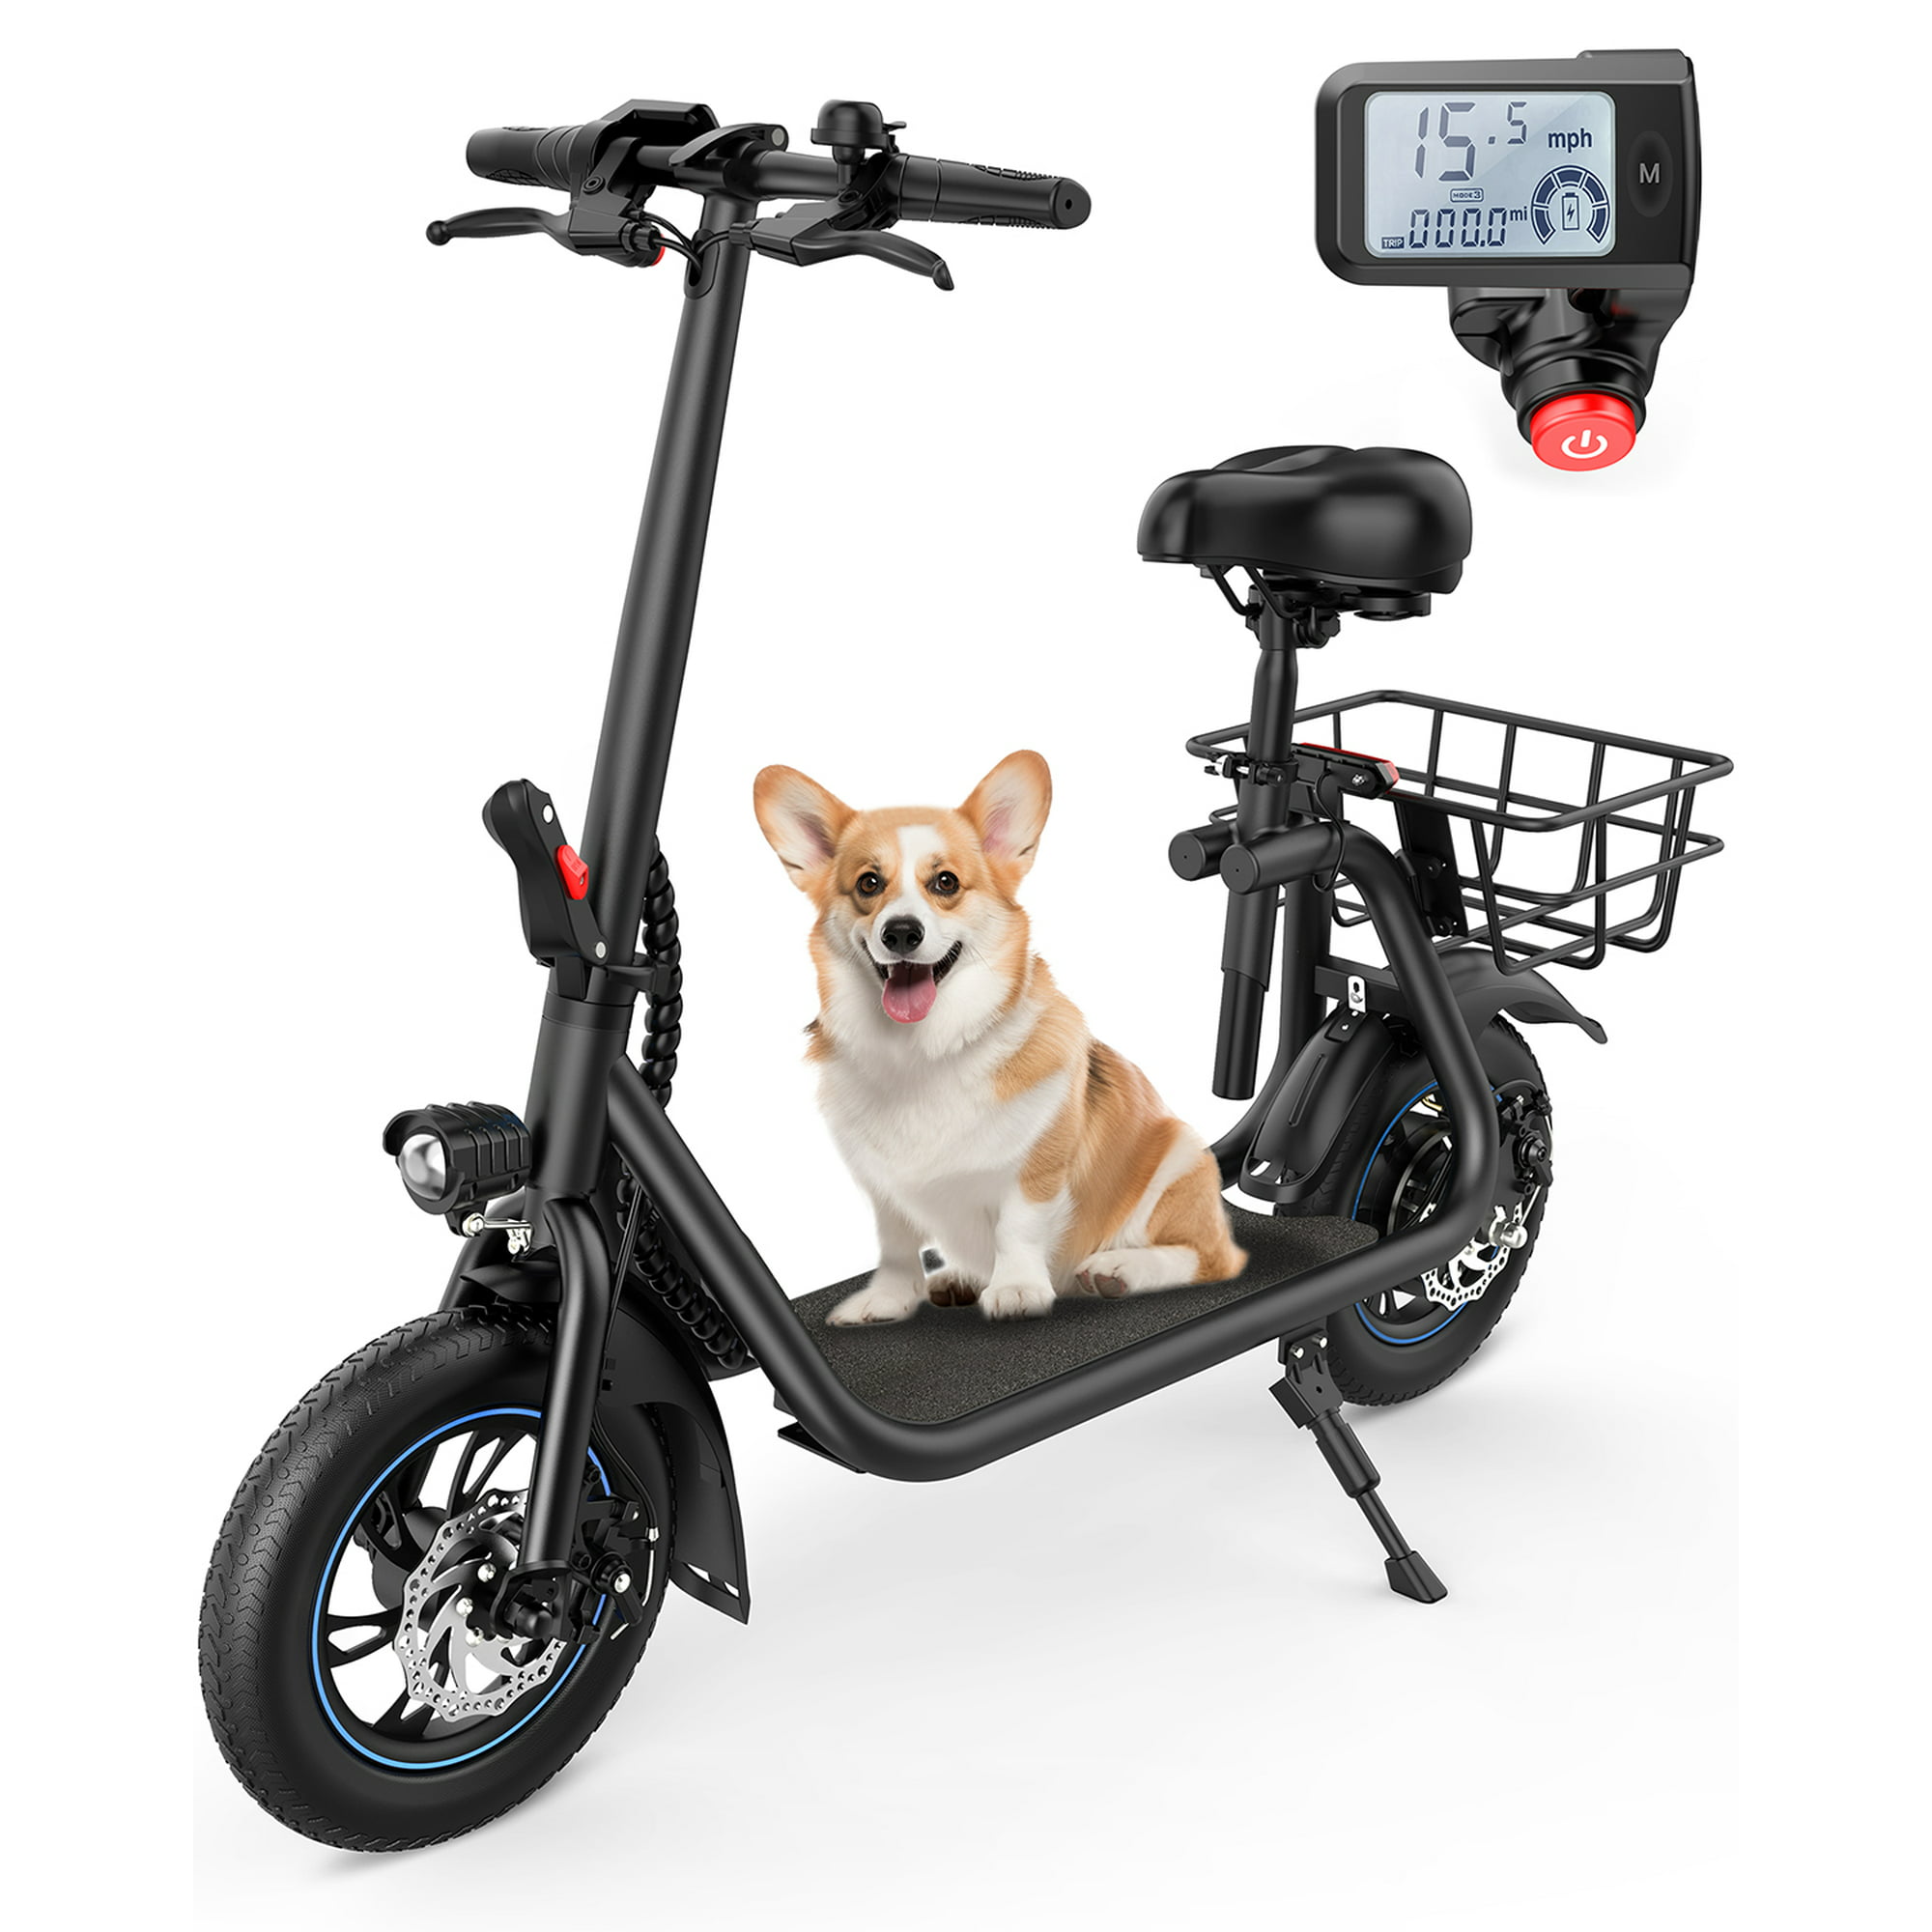 Kistp 450W 15.5MPH 12″ Commuter Electric Scooter with Seat and Basket